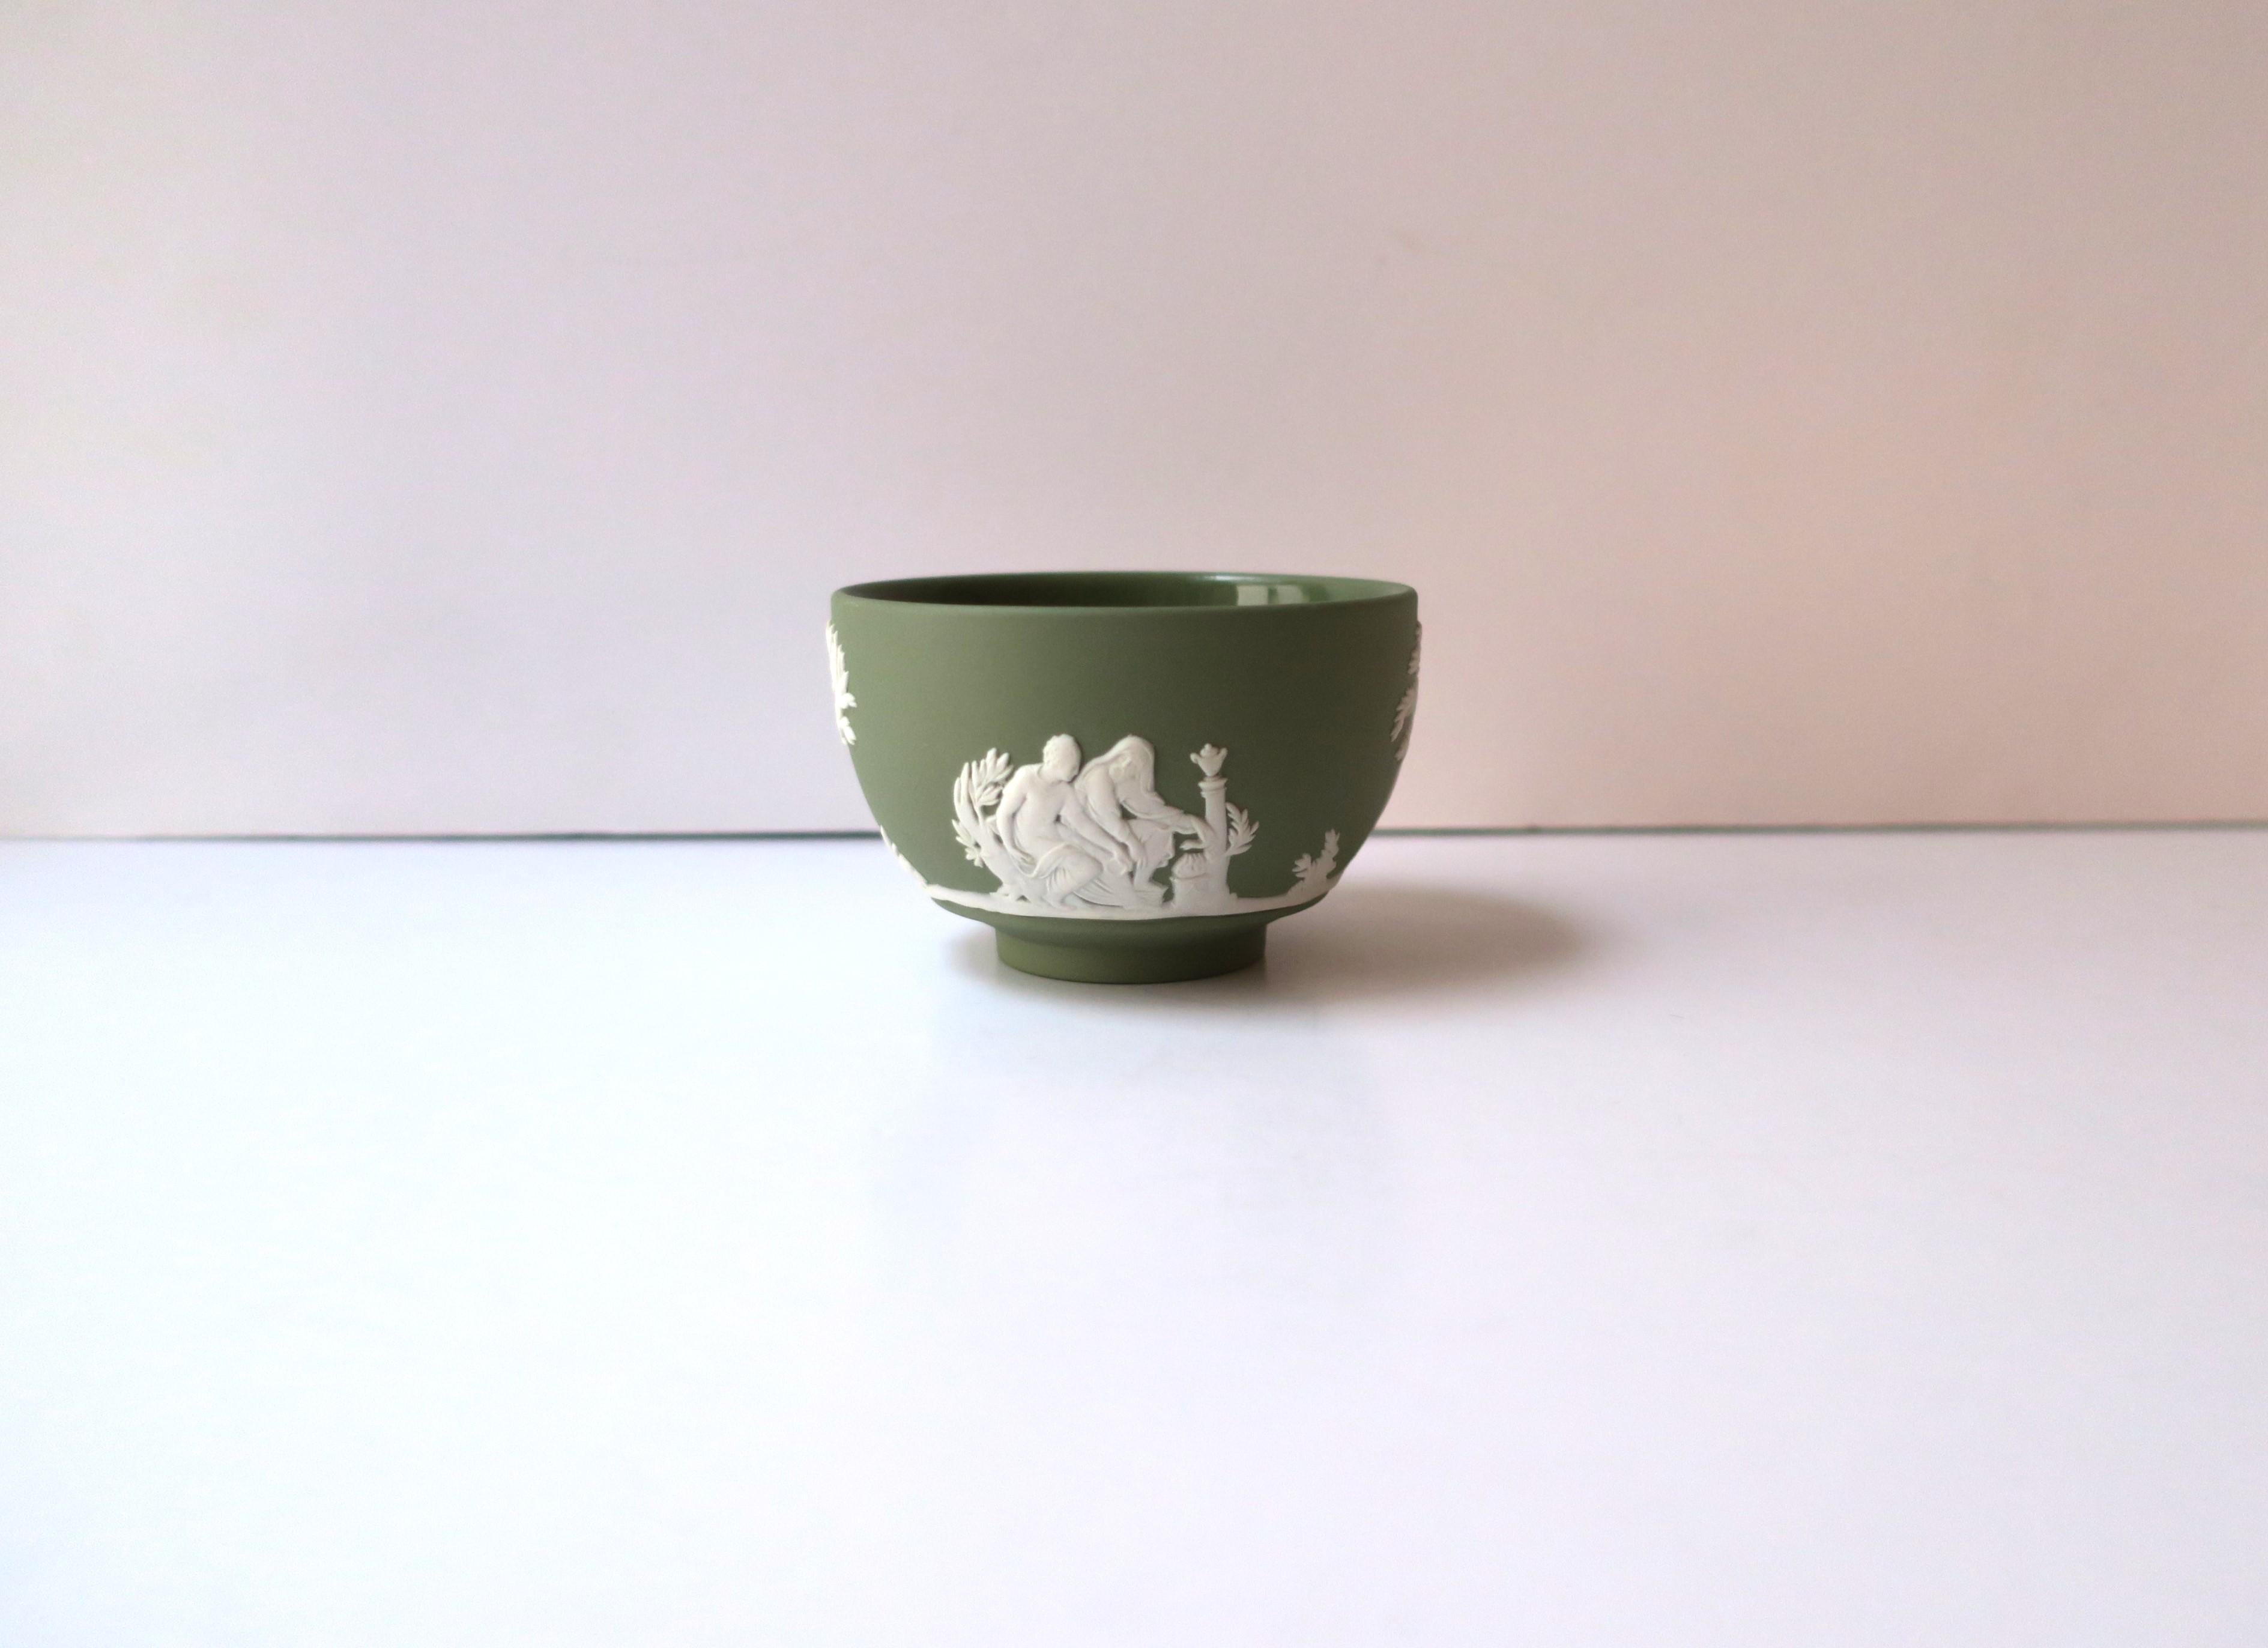 An English sage green and white Jasperware matte stoneware small footed bowl by Wedgwood, in the Neoclassical style, circa mid-20th century, 1960, England. A small, footed bowl, in a matte stoneware with raised relief scenes around exterior, in the